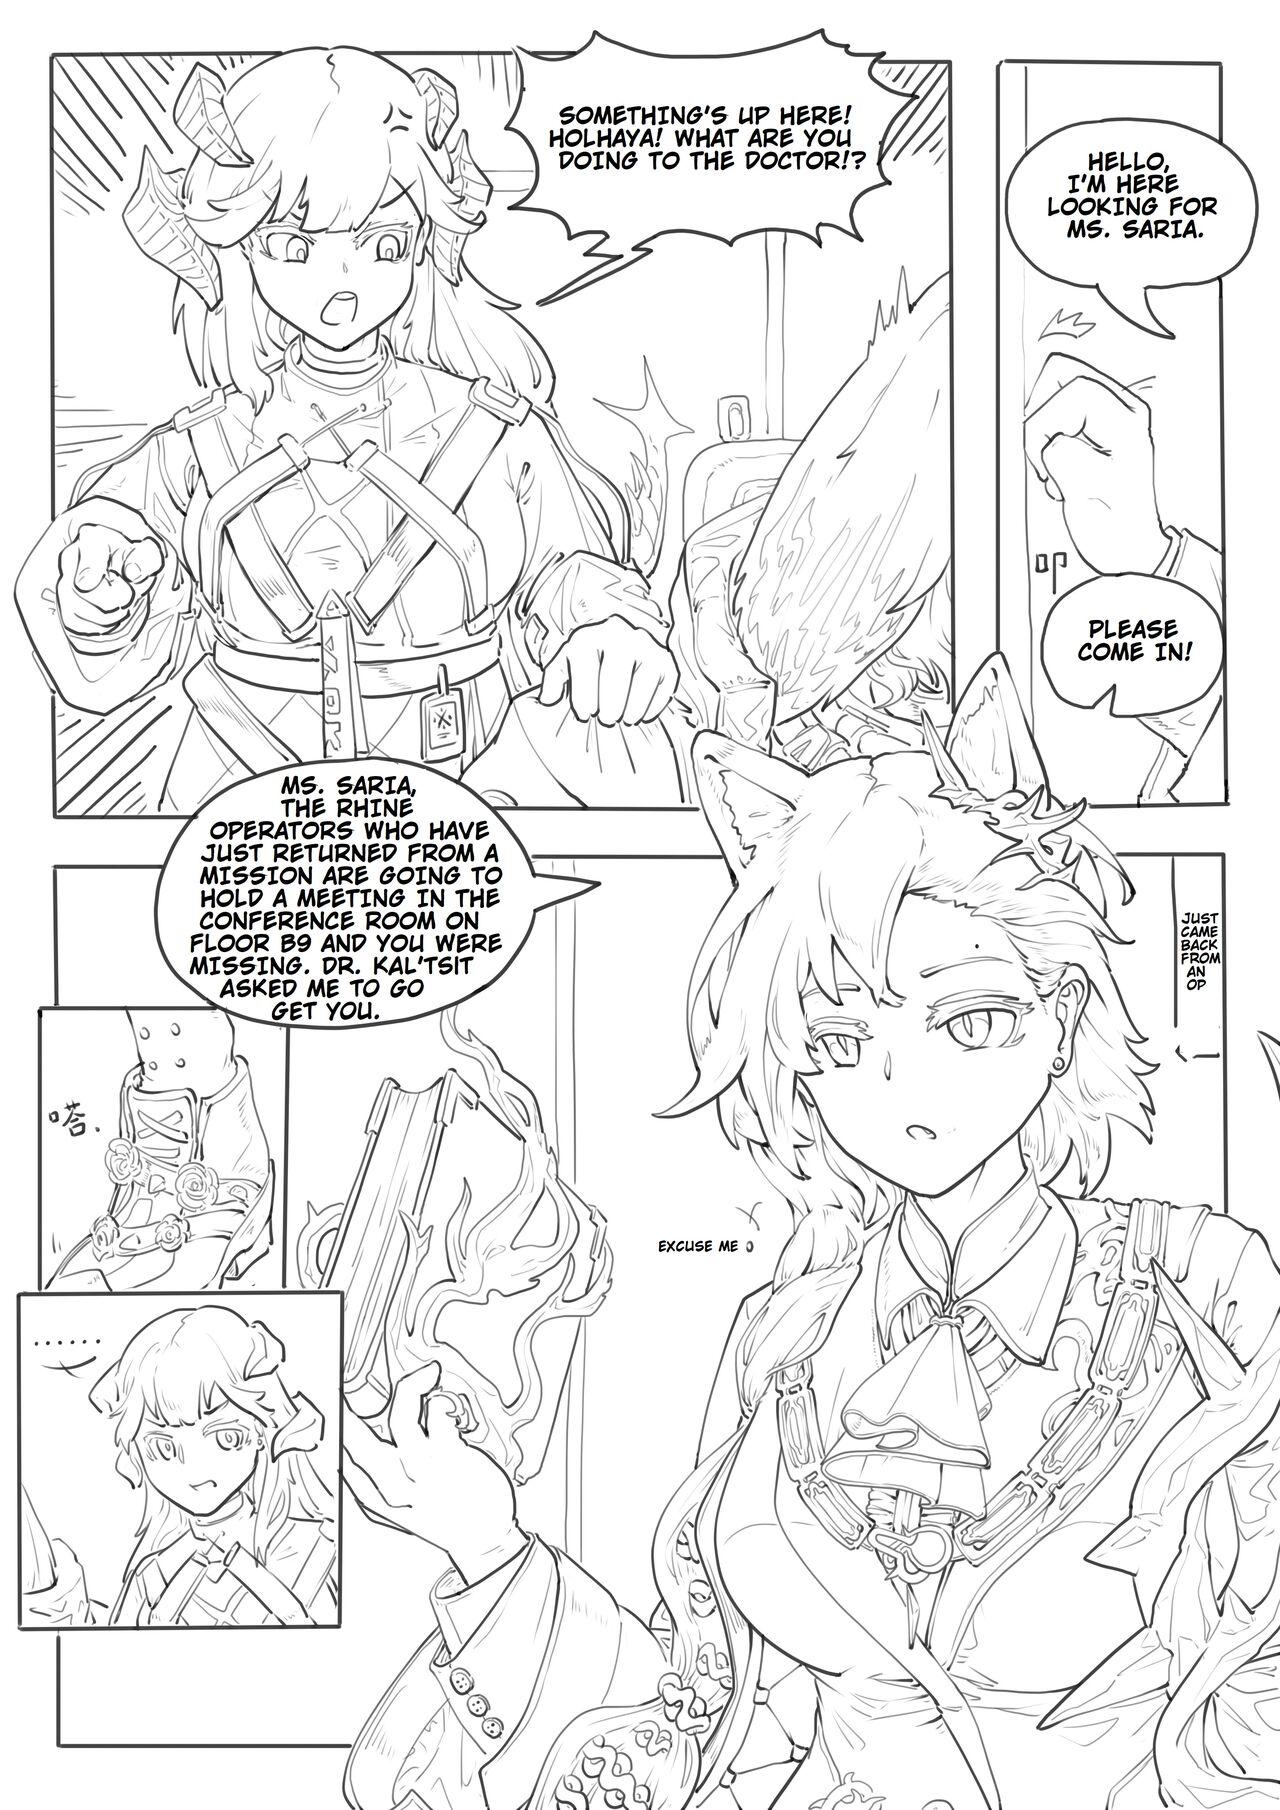 Holhaya and the Doctor's caressing routine (Arknights) [English) 10